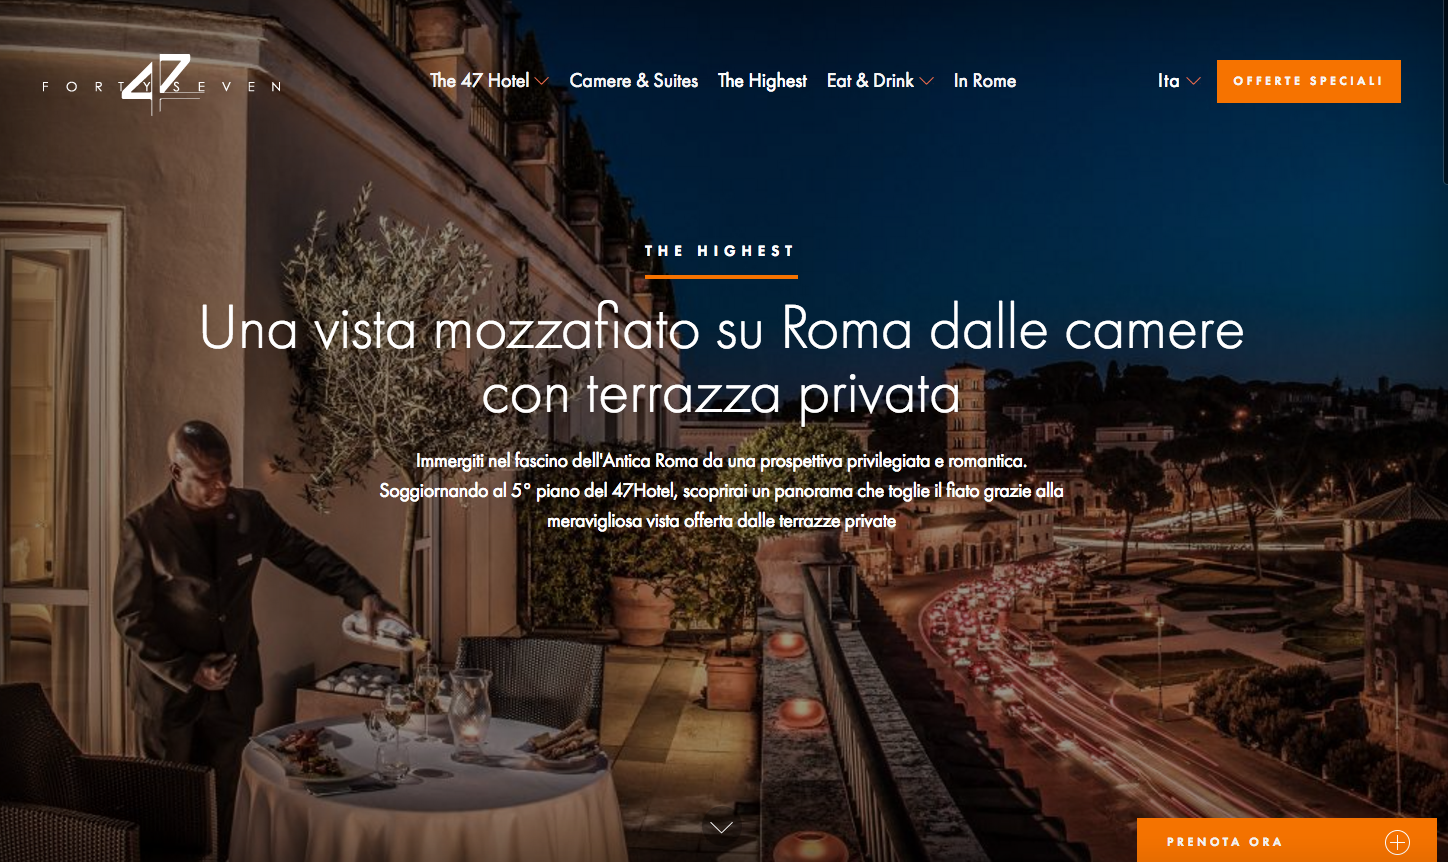 offerta_efficace_turismo_fortyseven_hotel_1.png